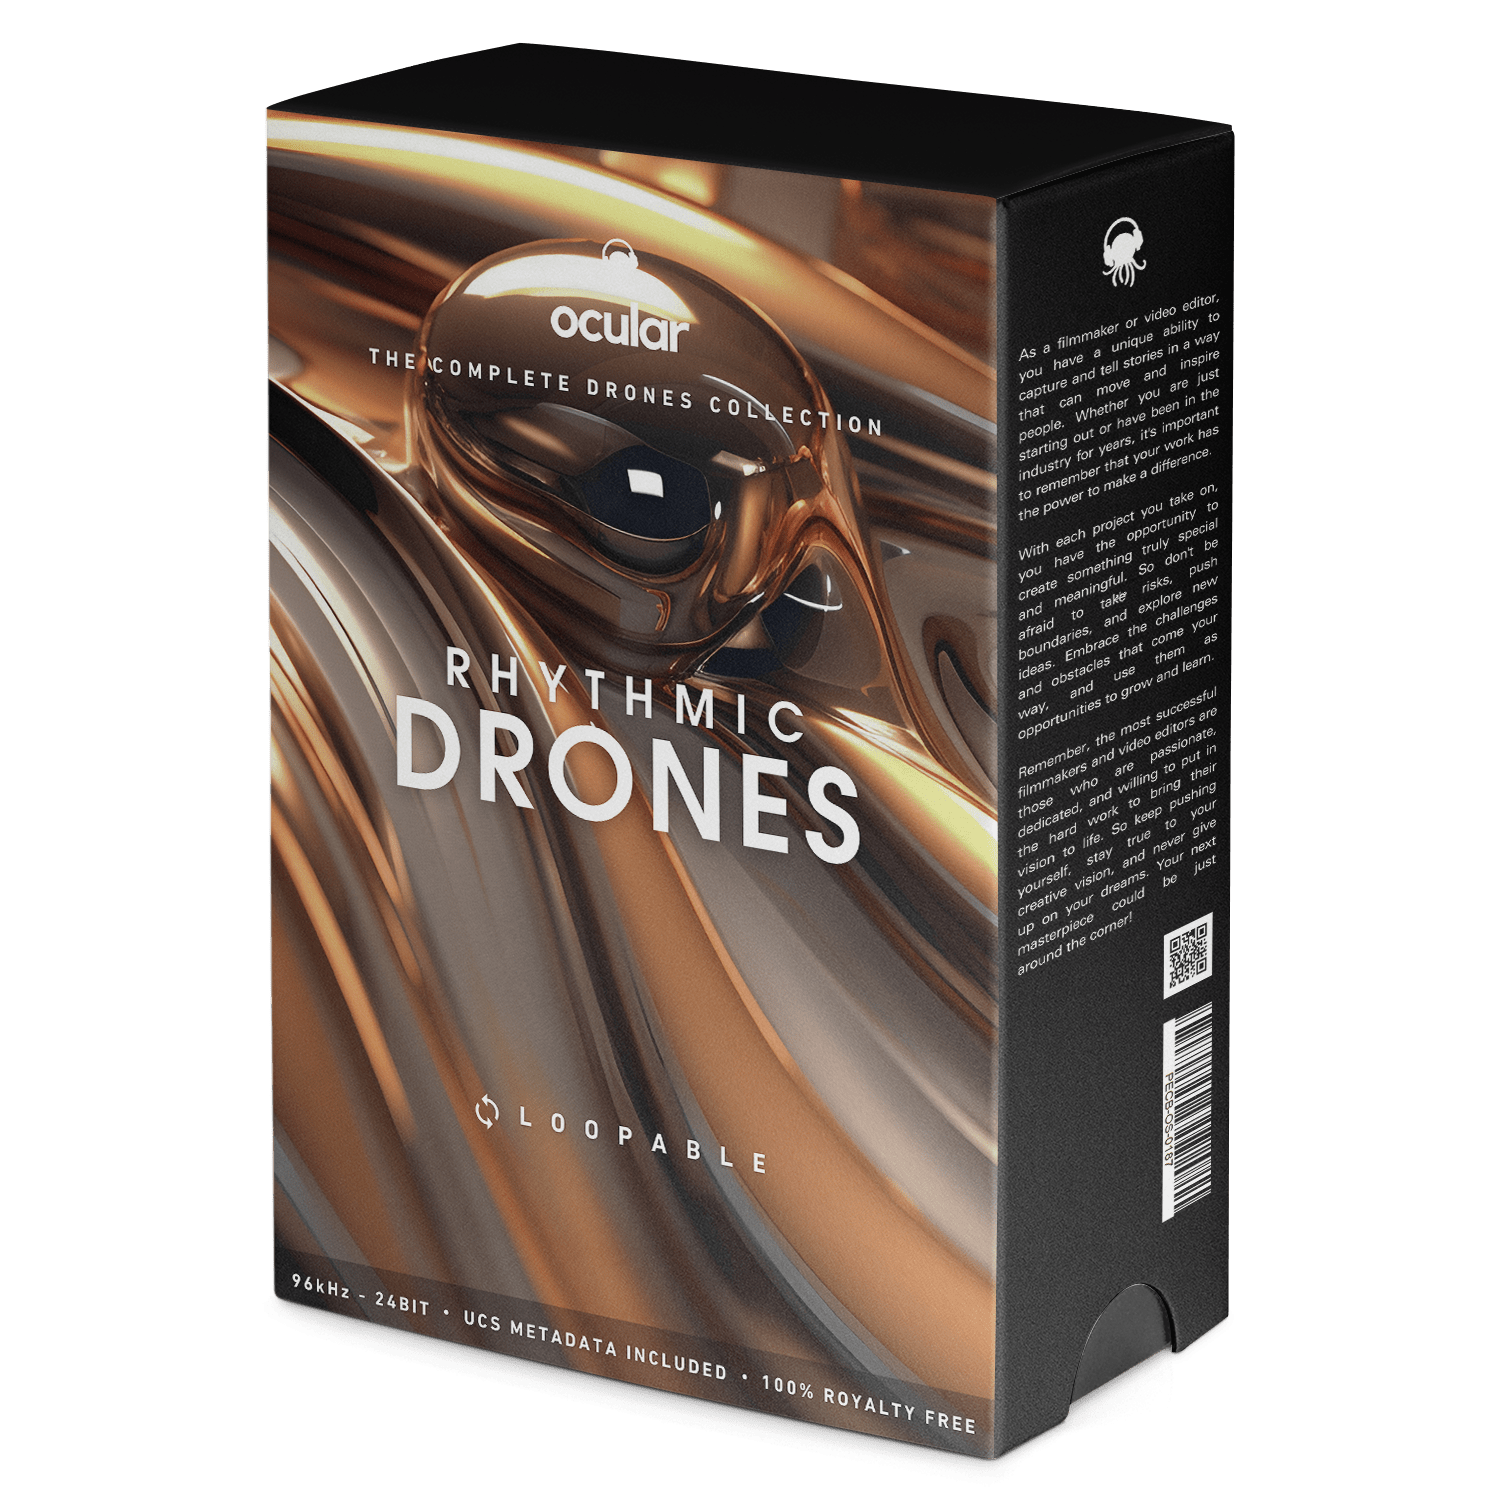 Rhythmic Drones Sound Effects for Video Editing. Professional Sound FX Library.